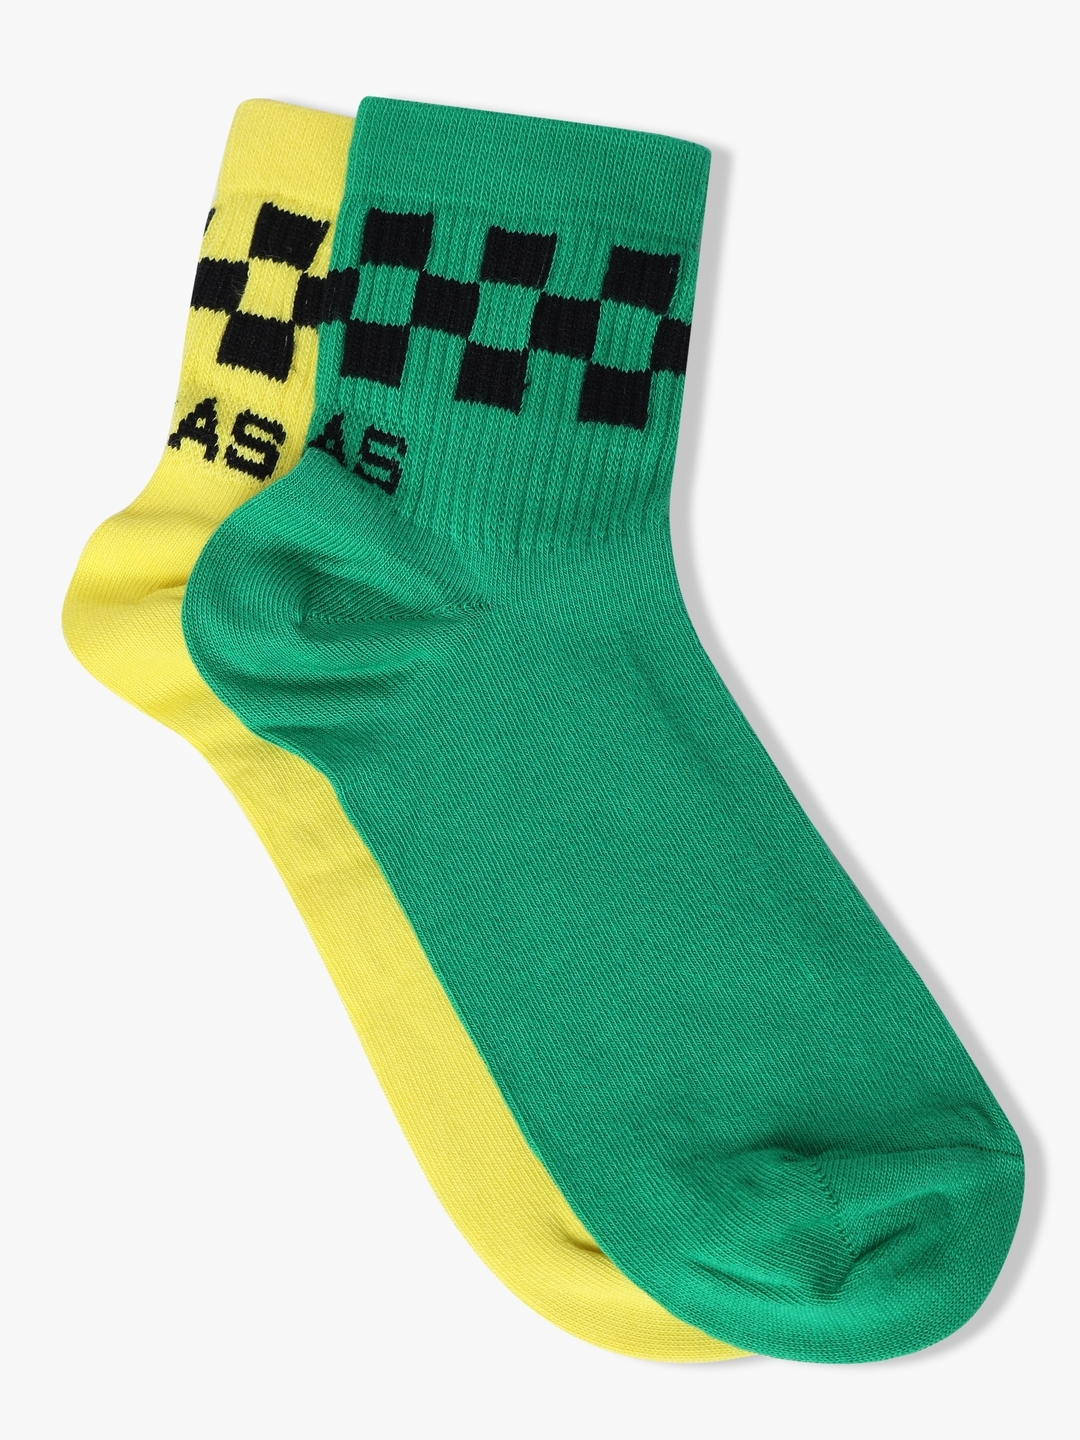 RETO IN Yellow & Green Check Socks (Pack of 2)